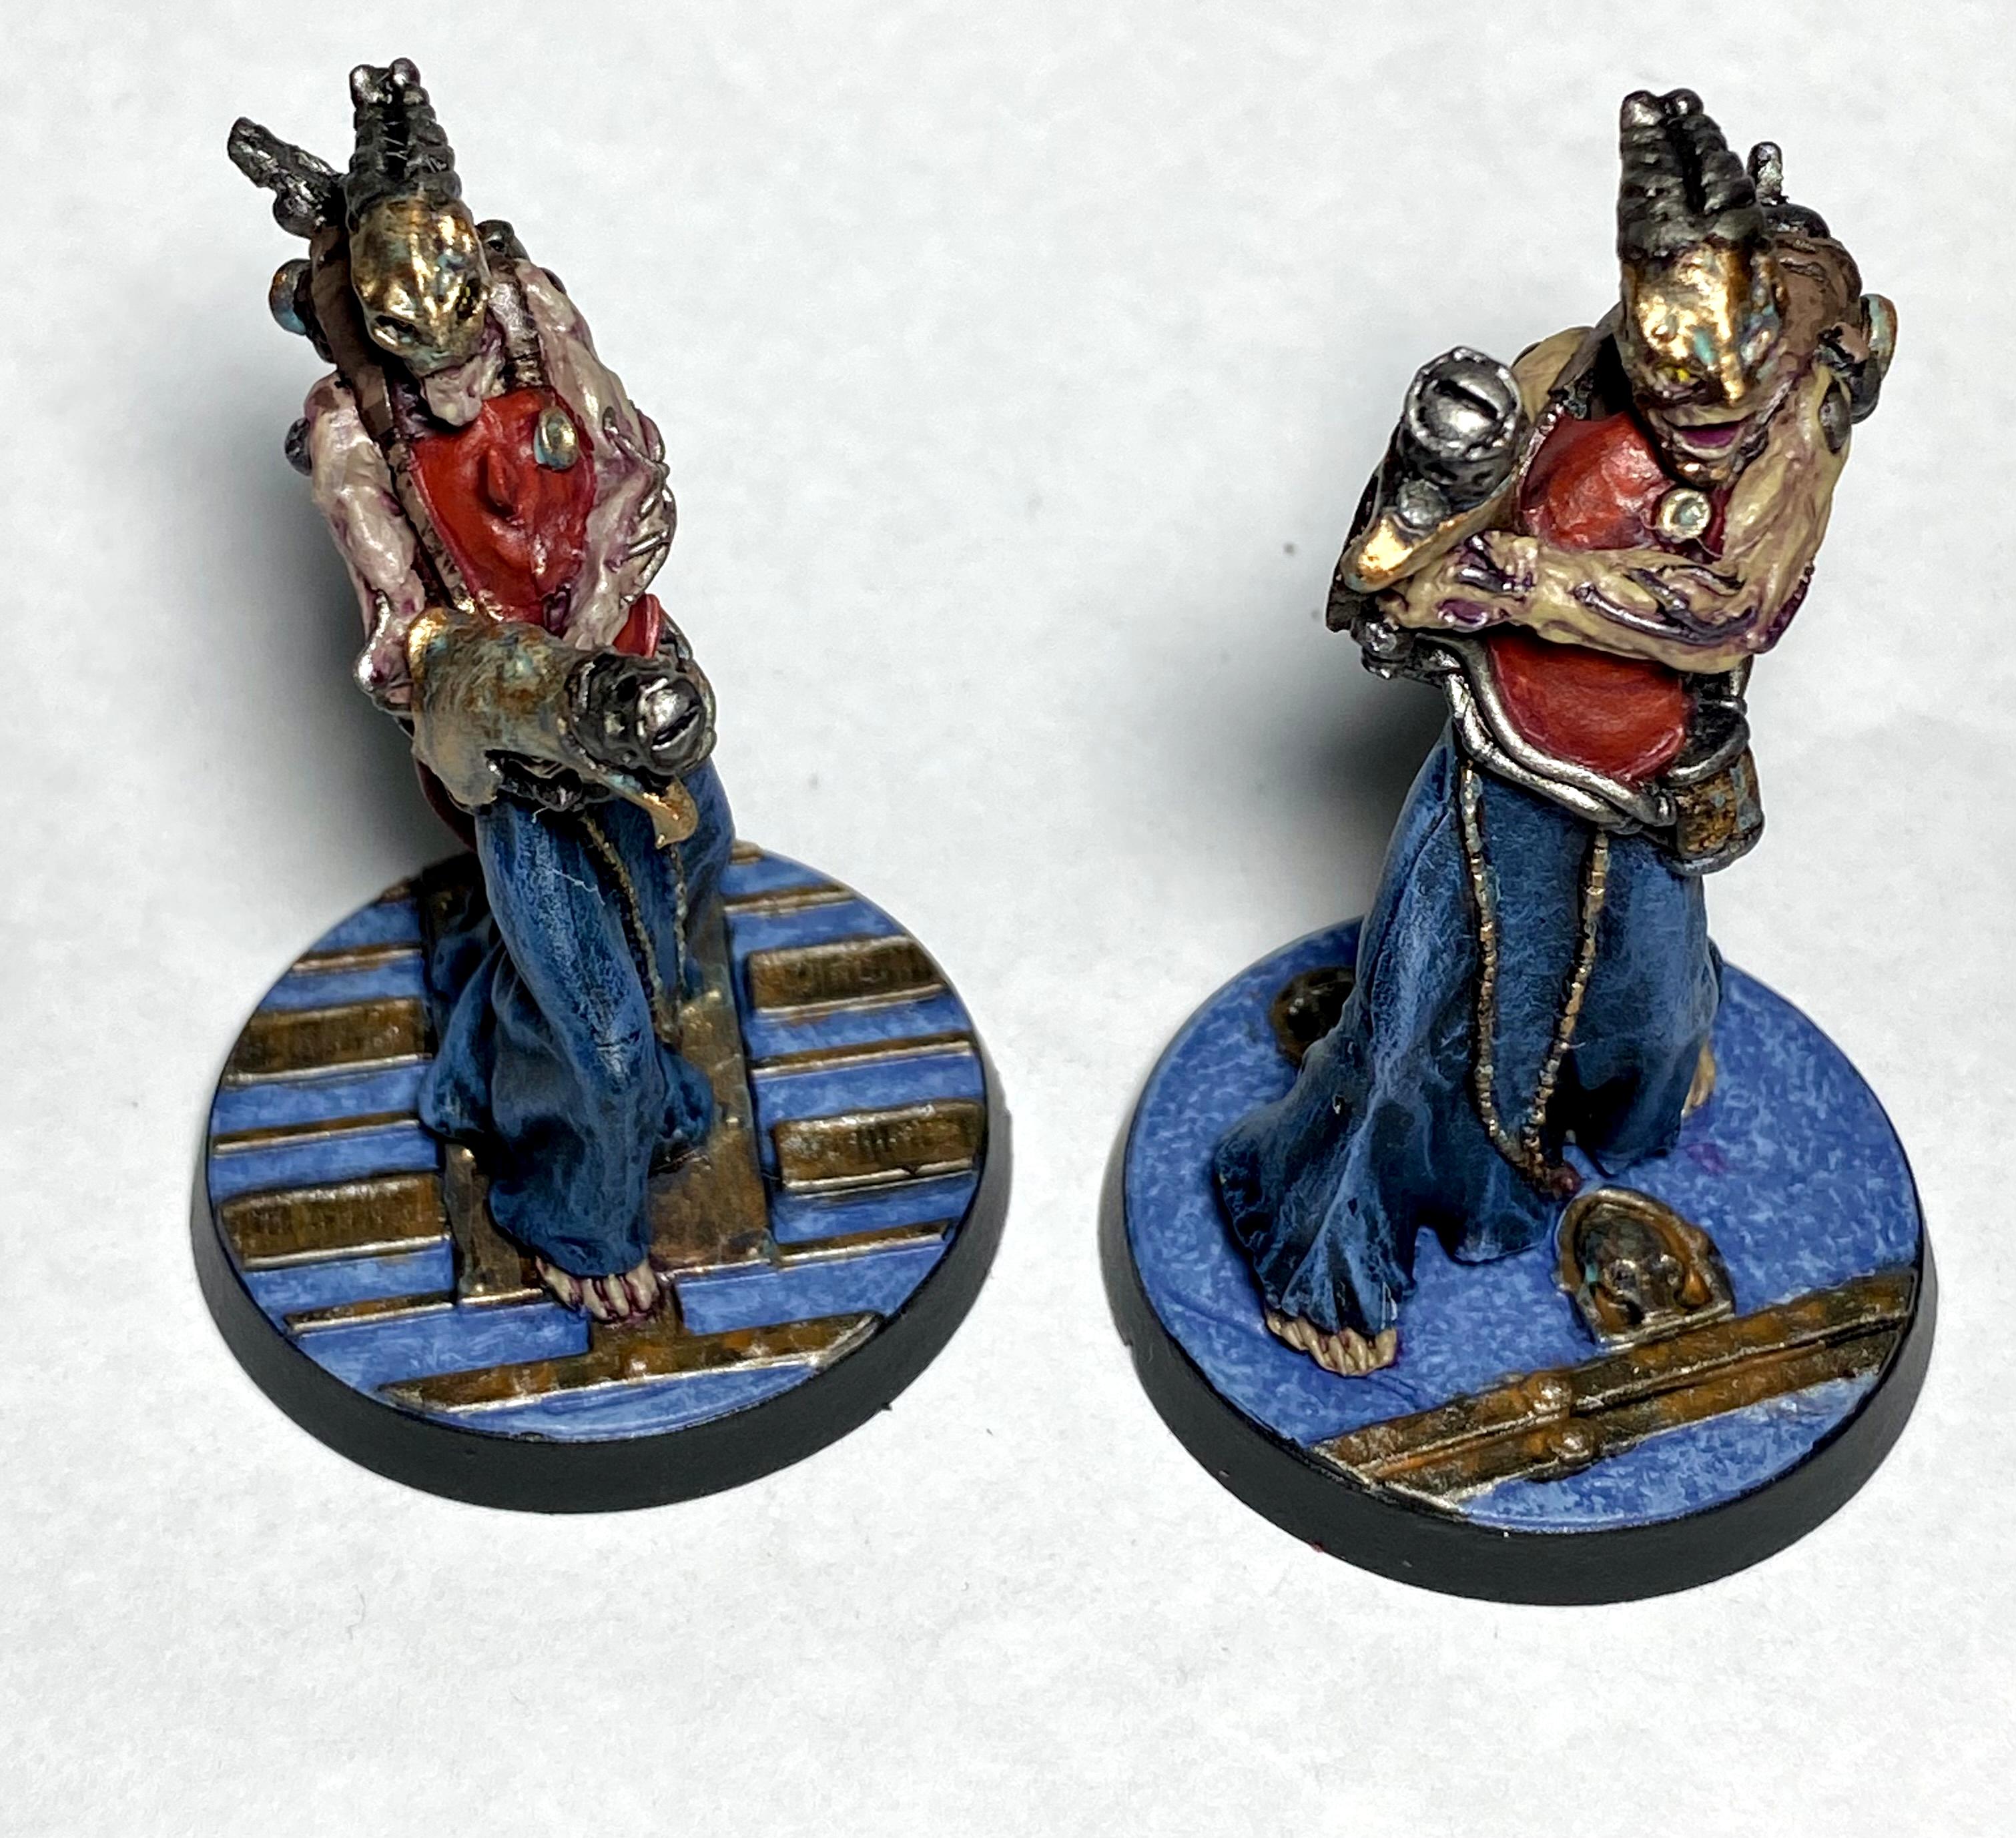 54mm, Chaos, Cultist, Inquisitor, Roleplay, Rpg, Warhammer 40,000, Warhammer Fantasy